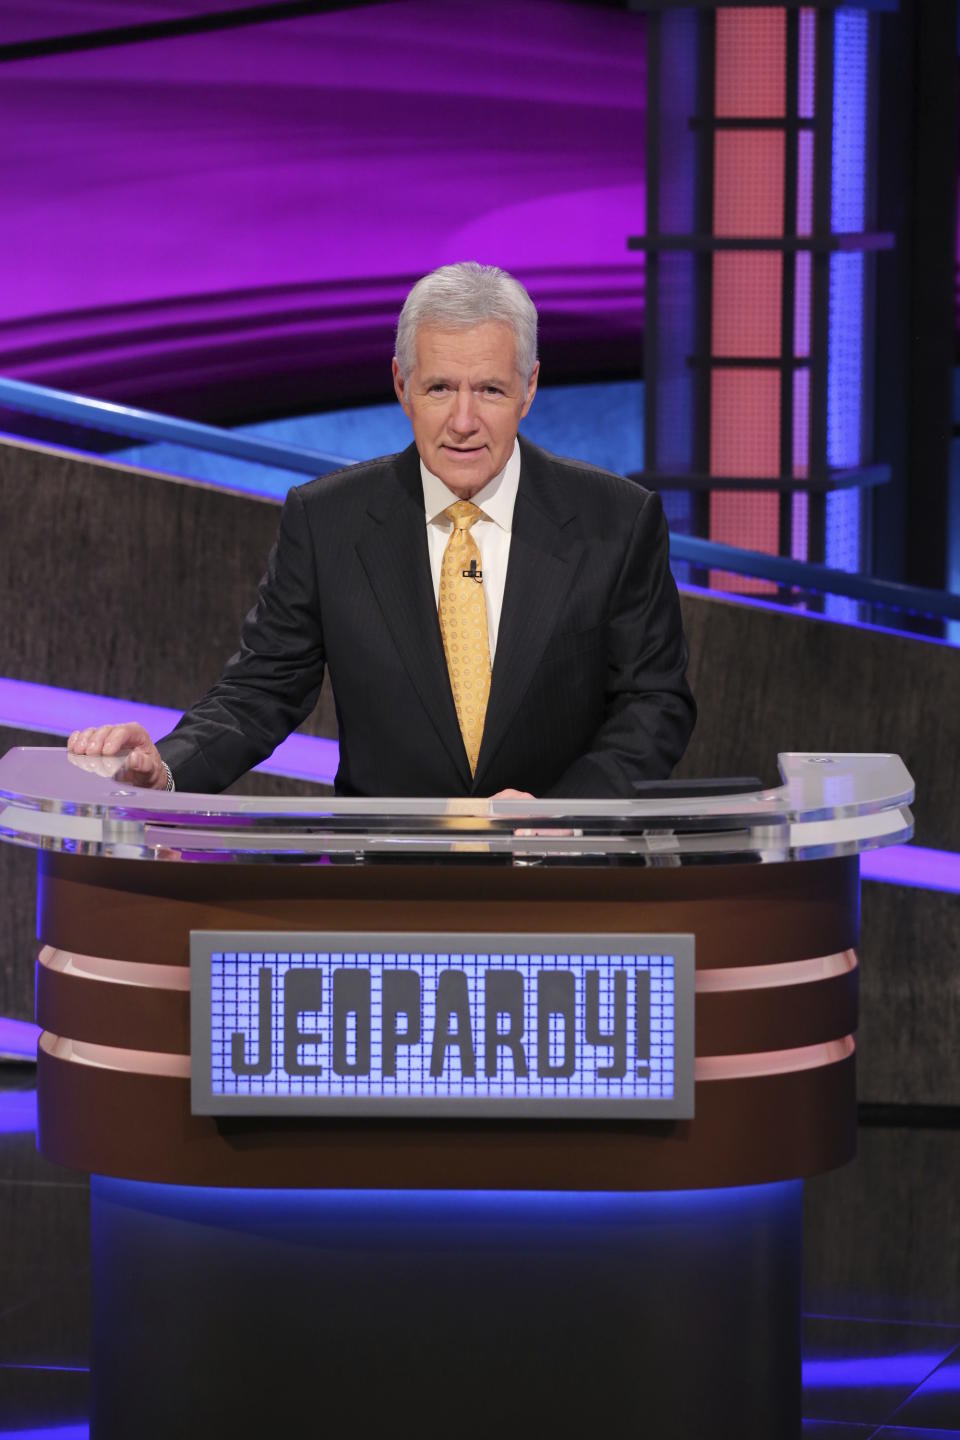 This image released by Jeopardy! shows host Alex Trebek, during a taping of the game show "Jeopardy!" on Aug. 26, 2015. (Jeopardy! via AP)